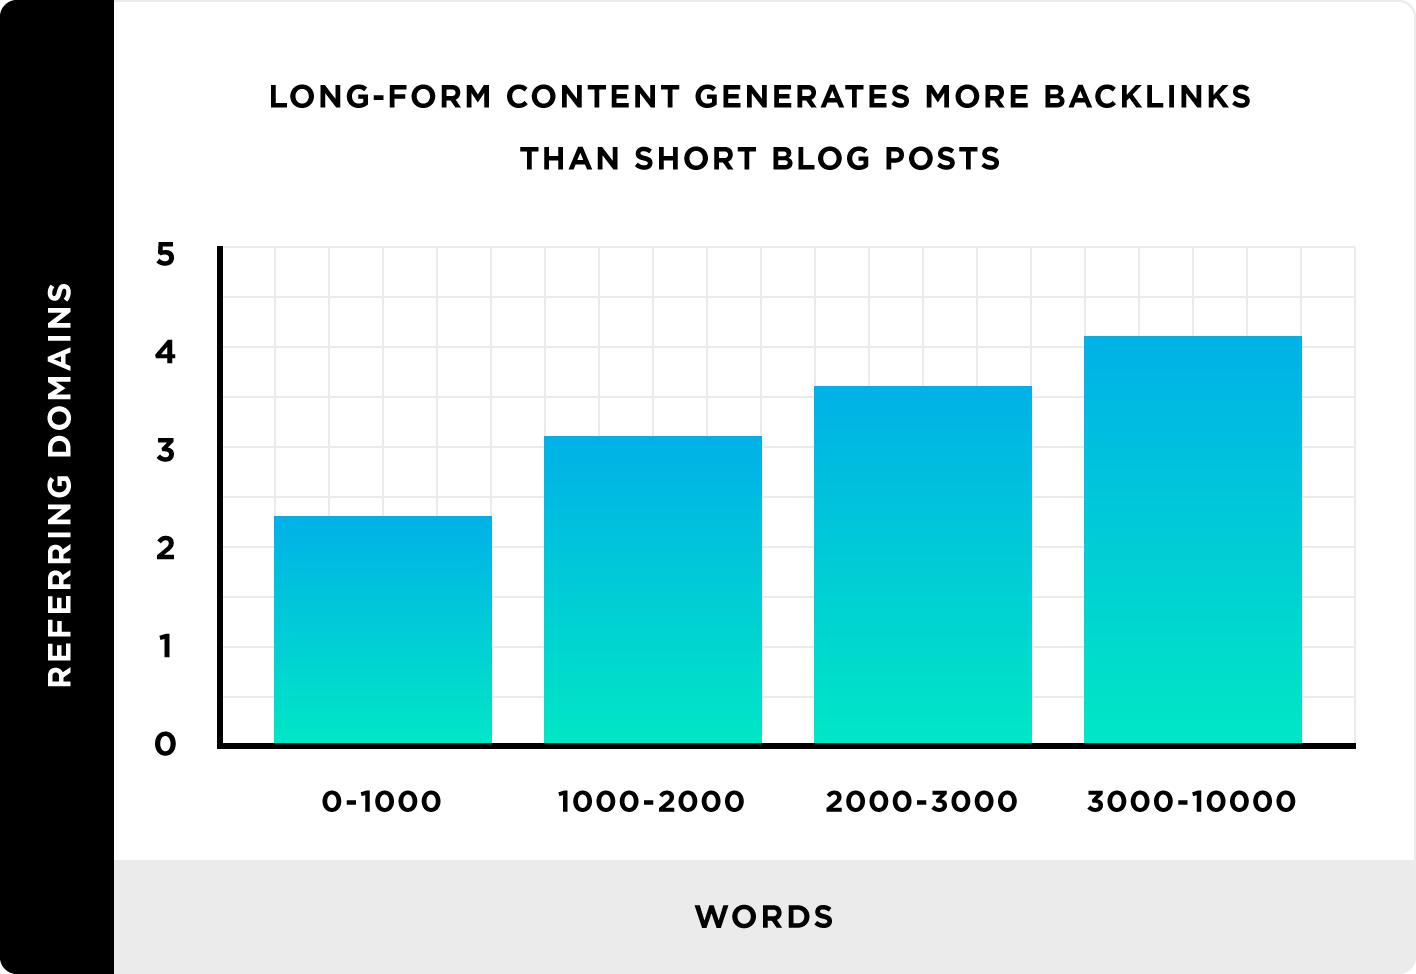 Backlinko: Long-form content that is 10000+ words gets the most backlinks.